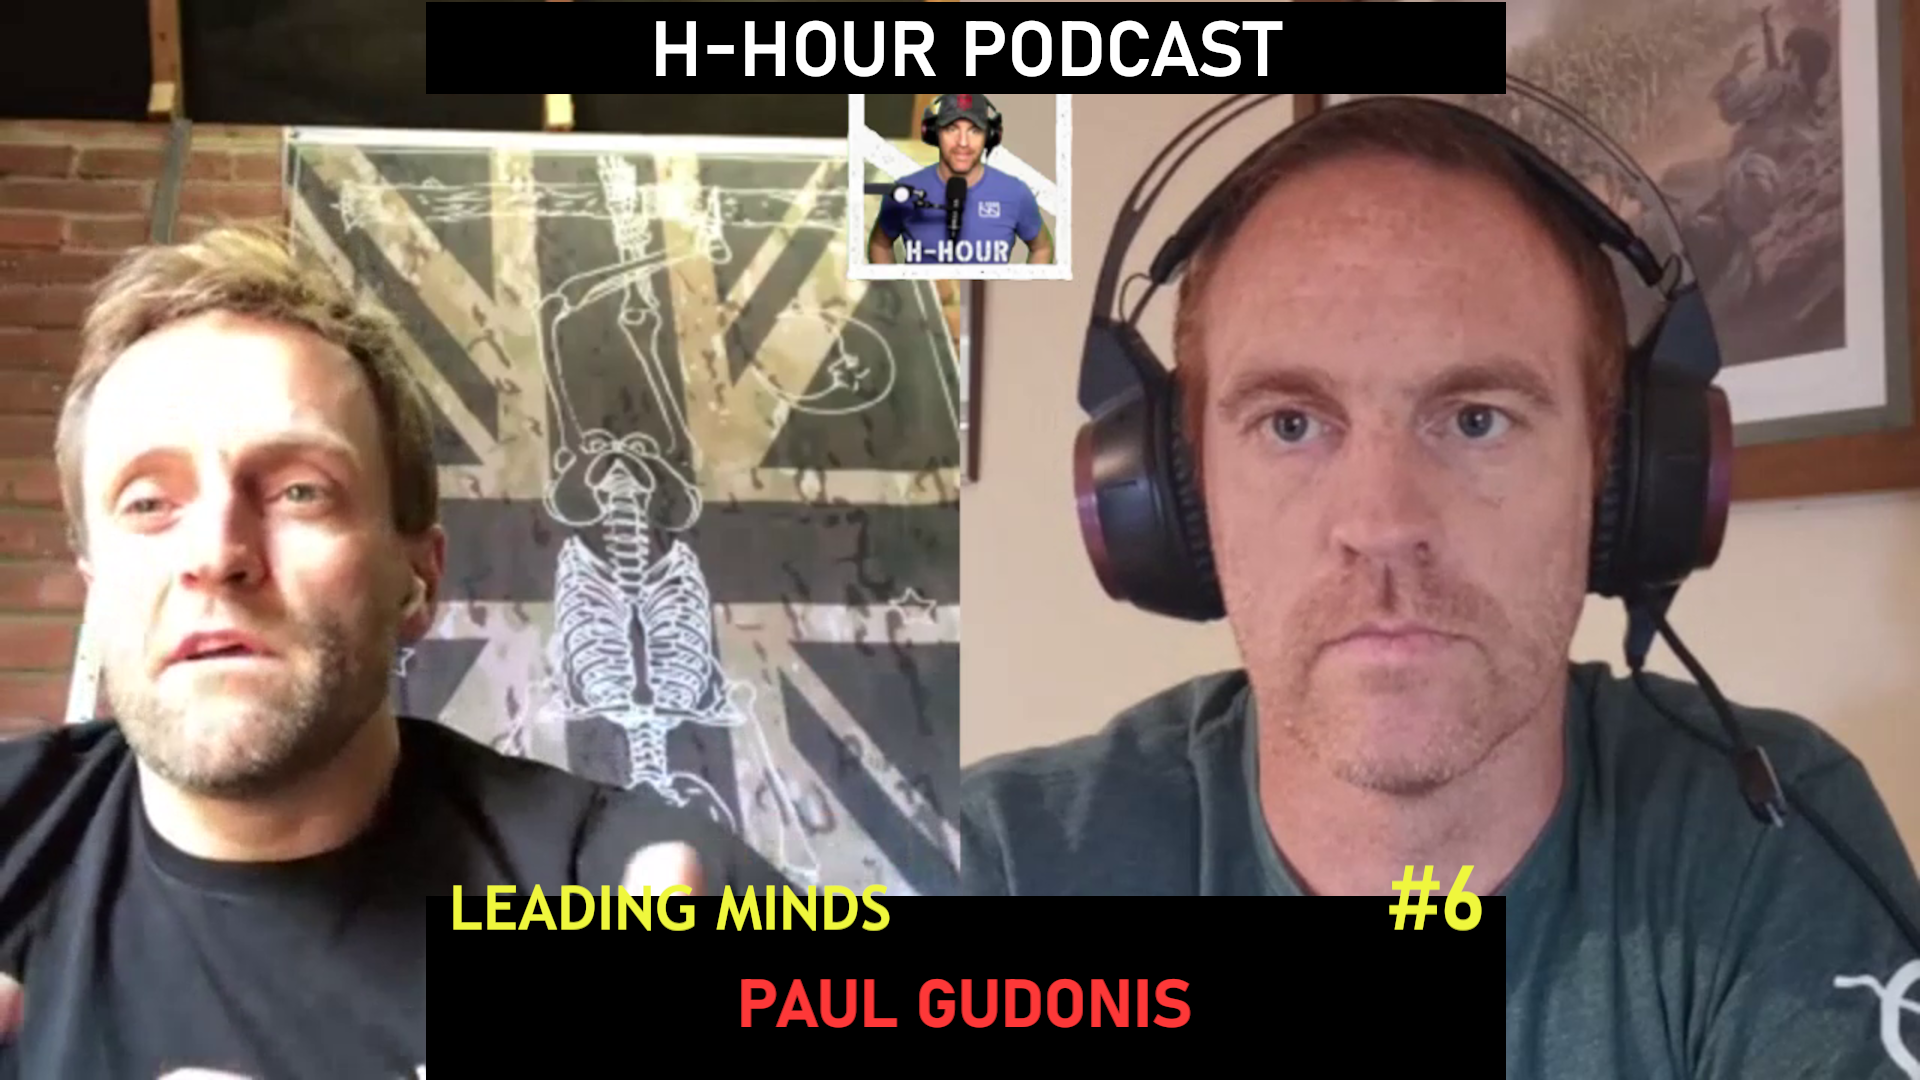 paul gudonis and hugh keir on h-hour podcast